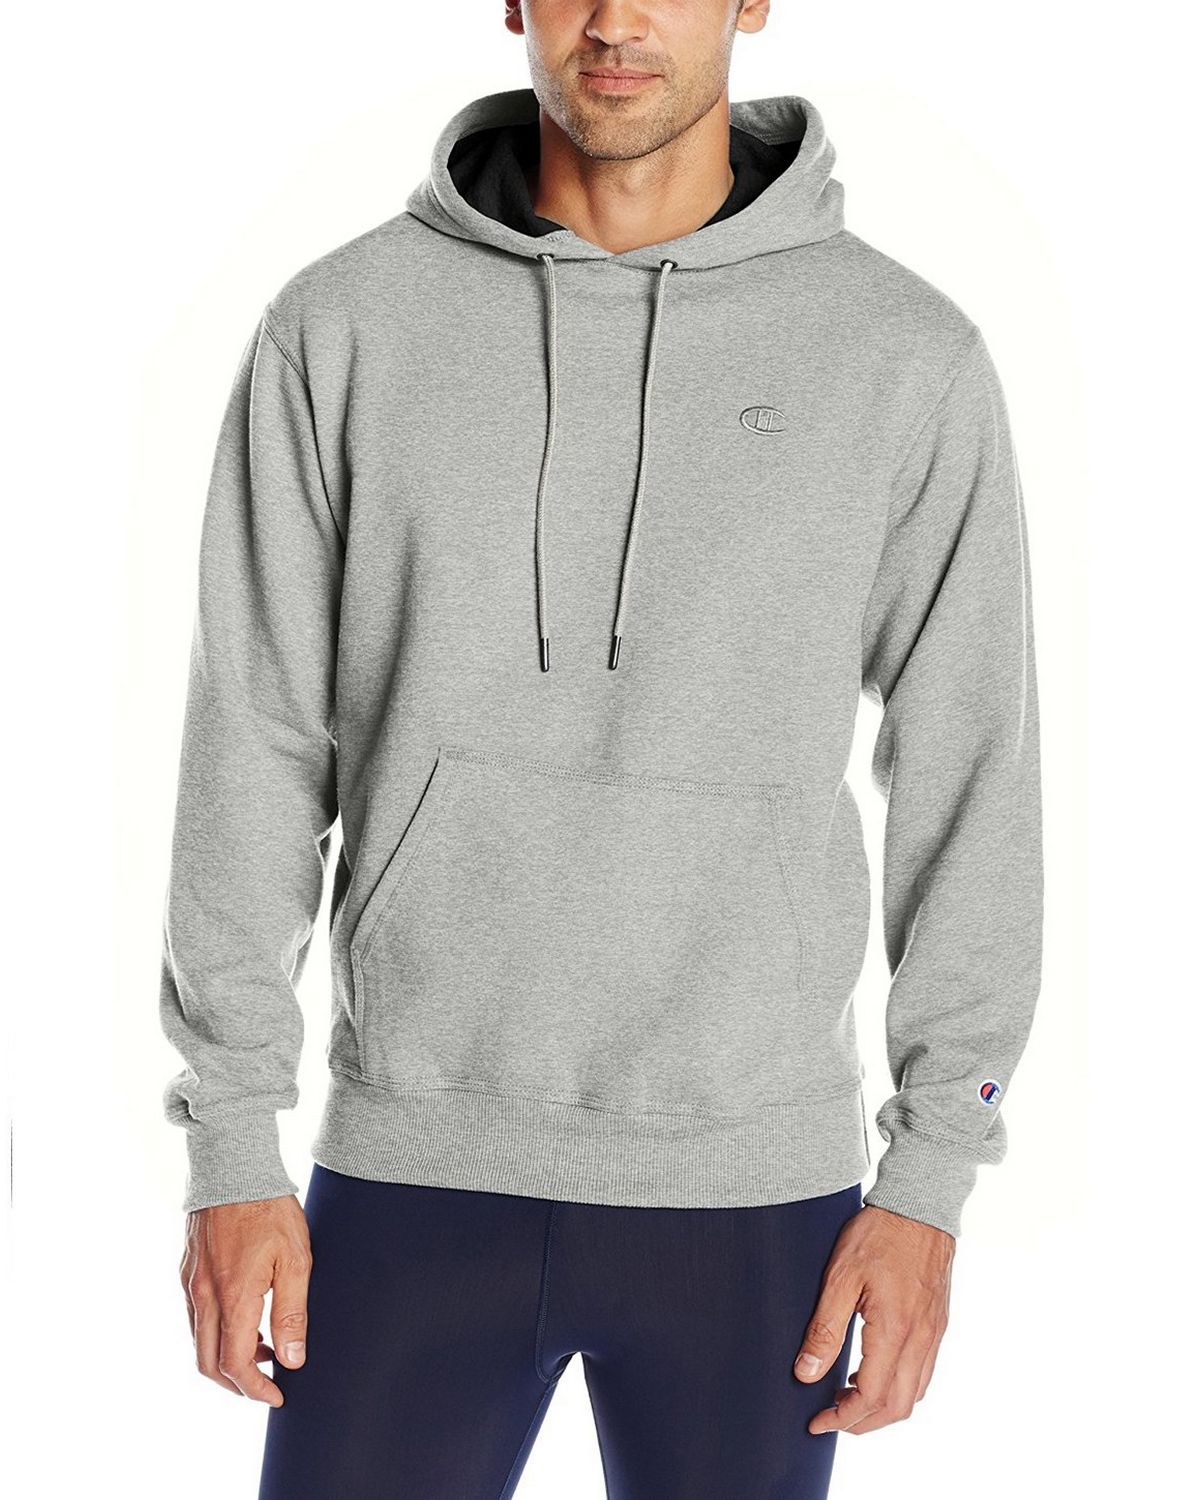 Champion S0889 Mens Powerblend Fleece Pullover Hoodie at ApparelnBags.com